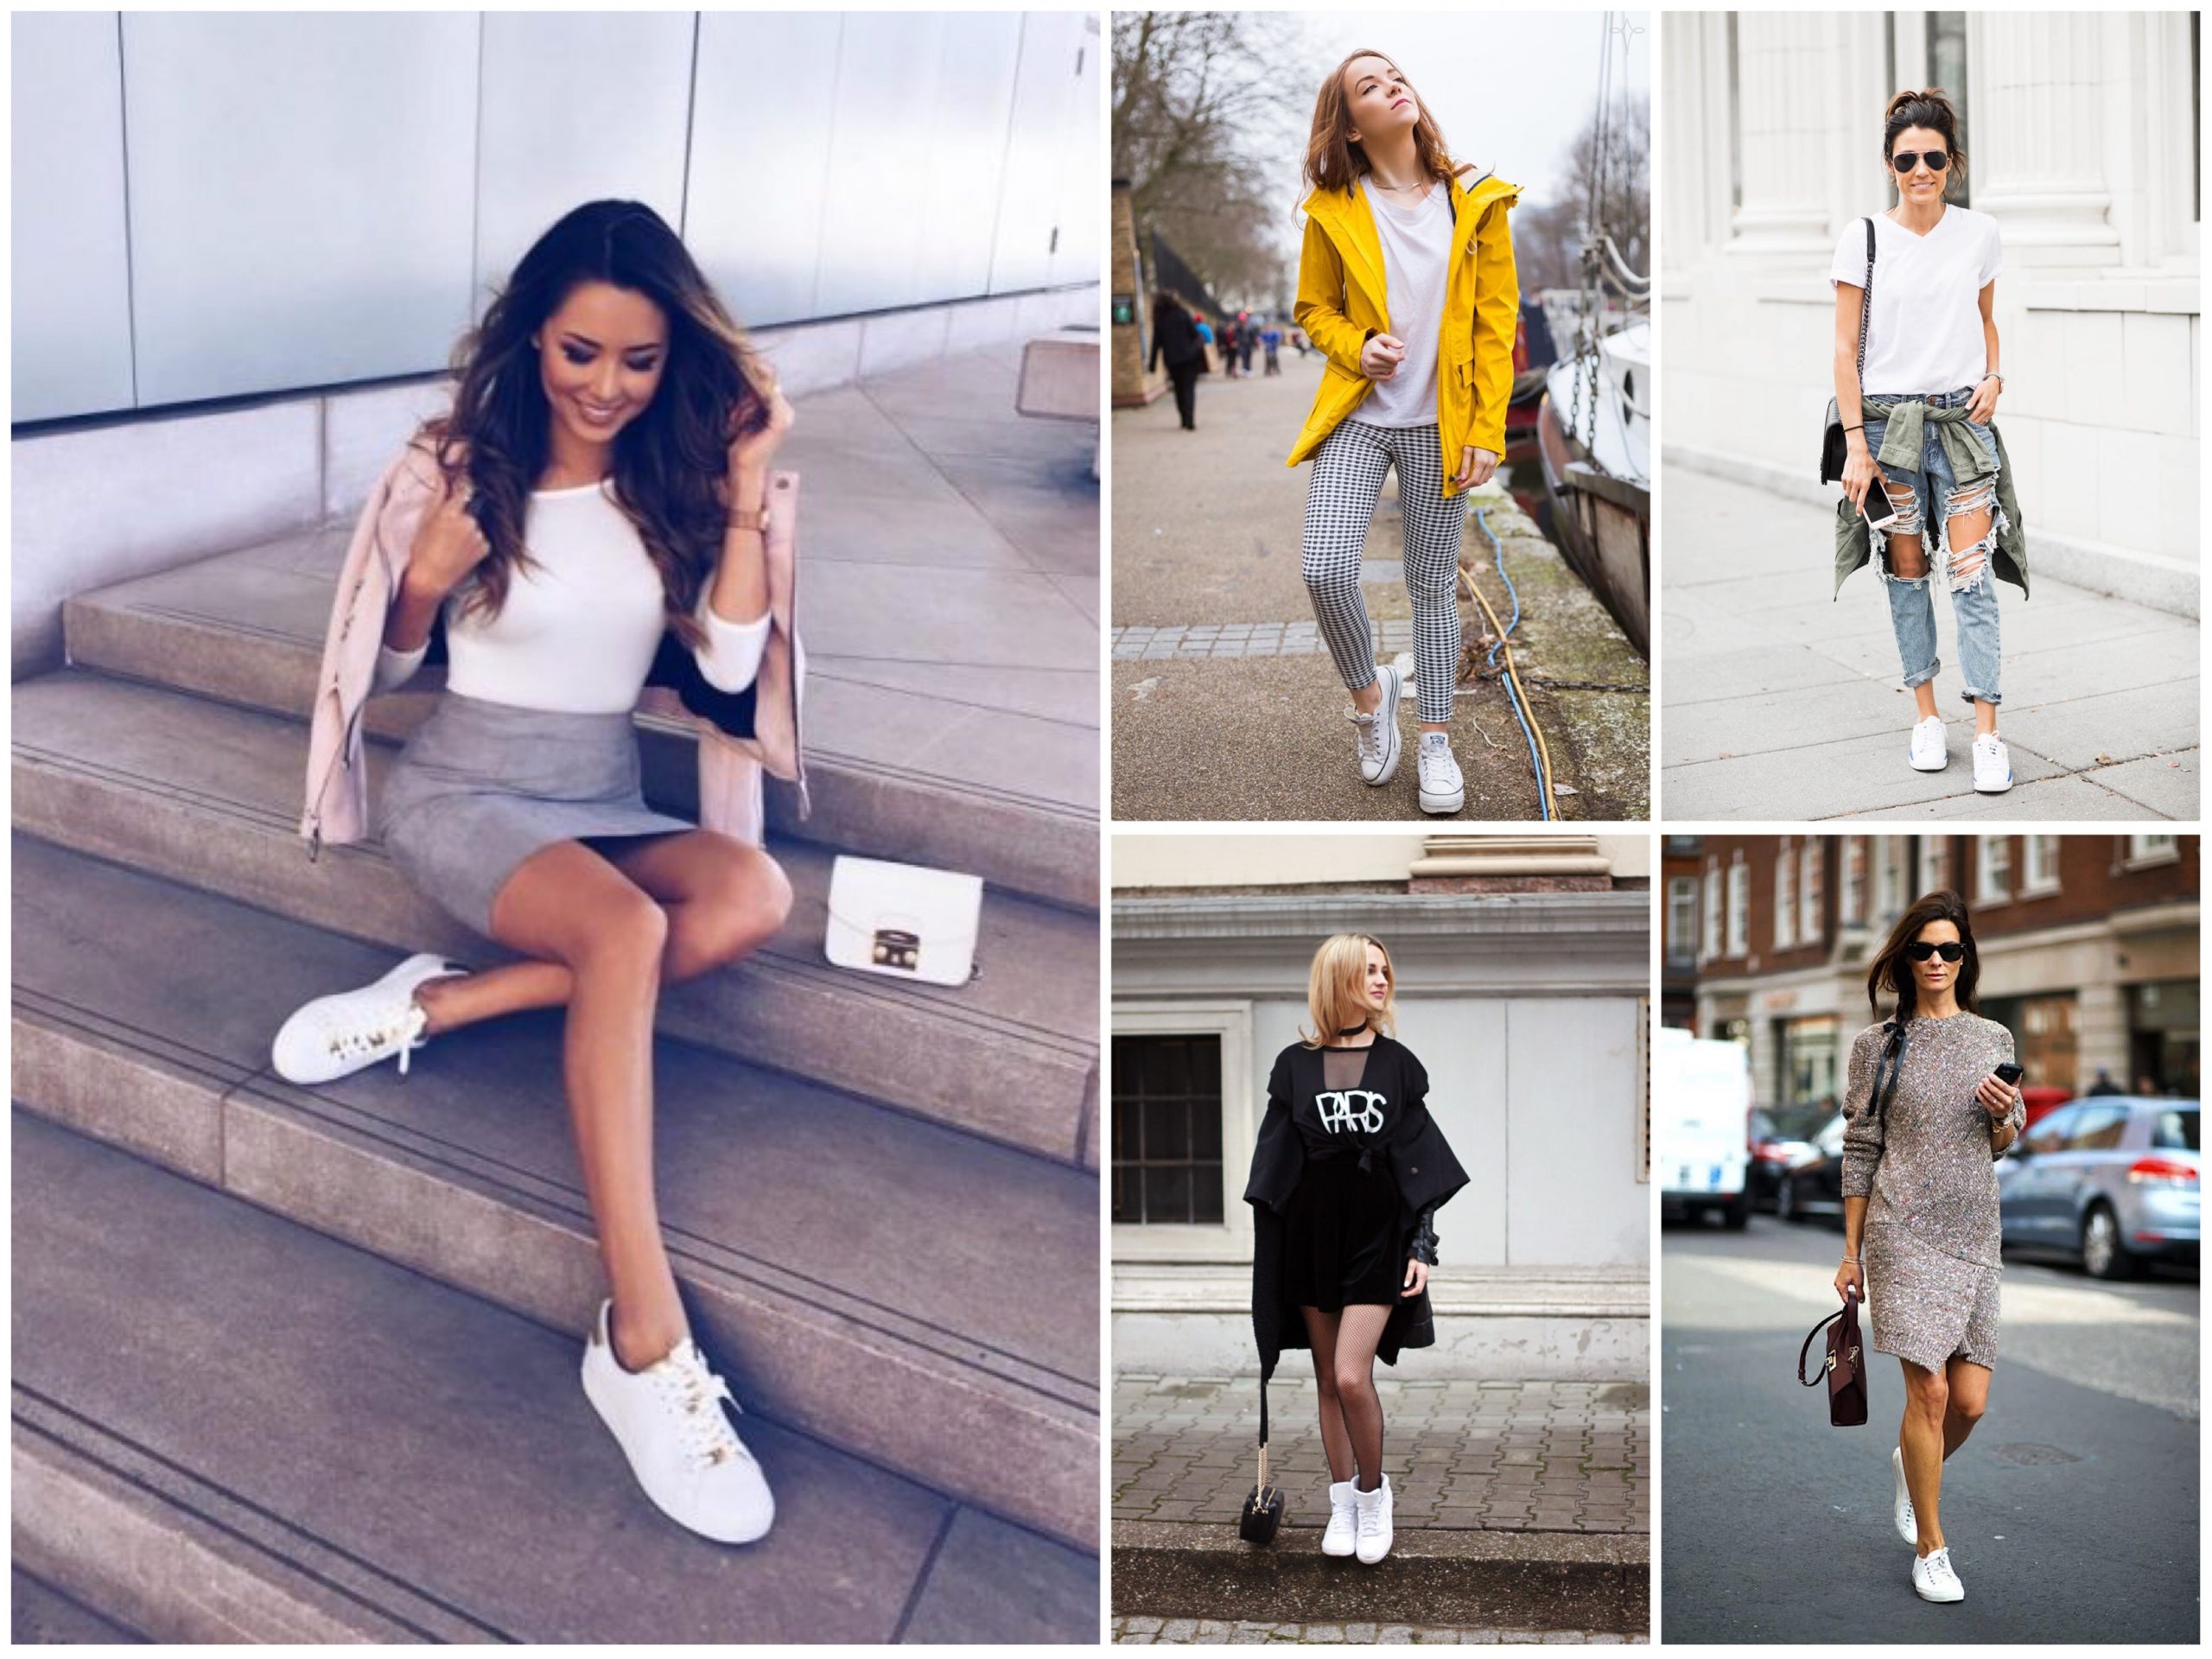 Top 10 white sneakers for girls going to school / work